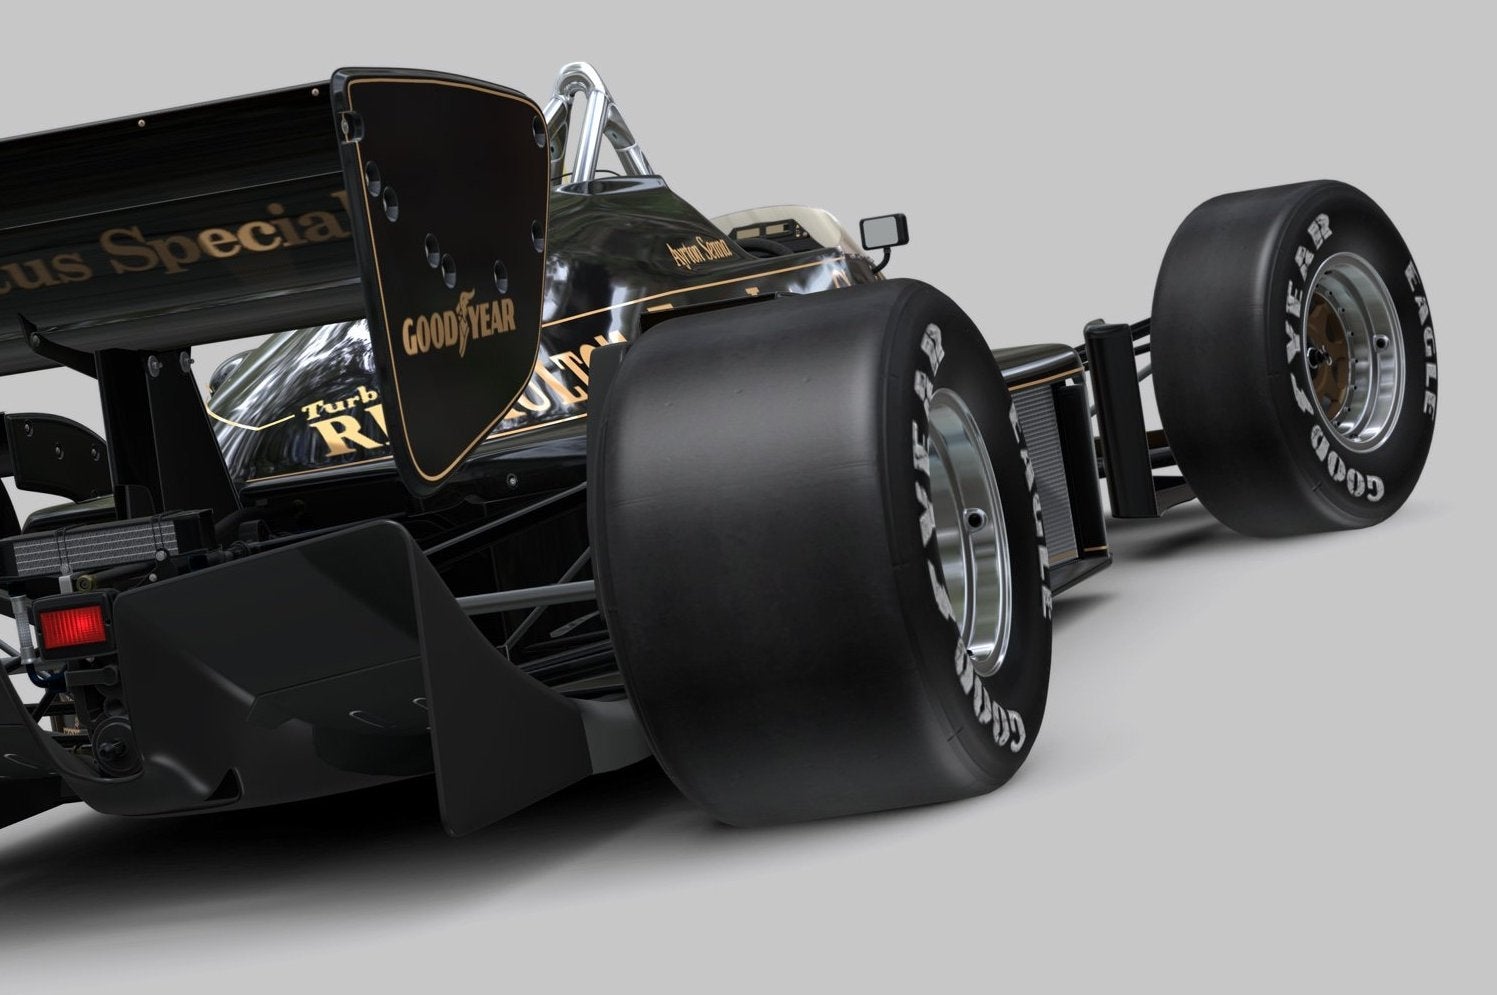 Image for Ayrton Senna themed content coming to Gran Turismo 6 this month